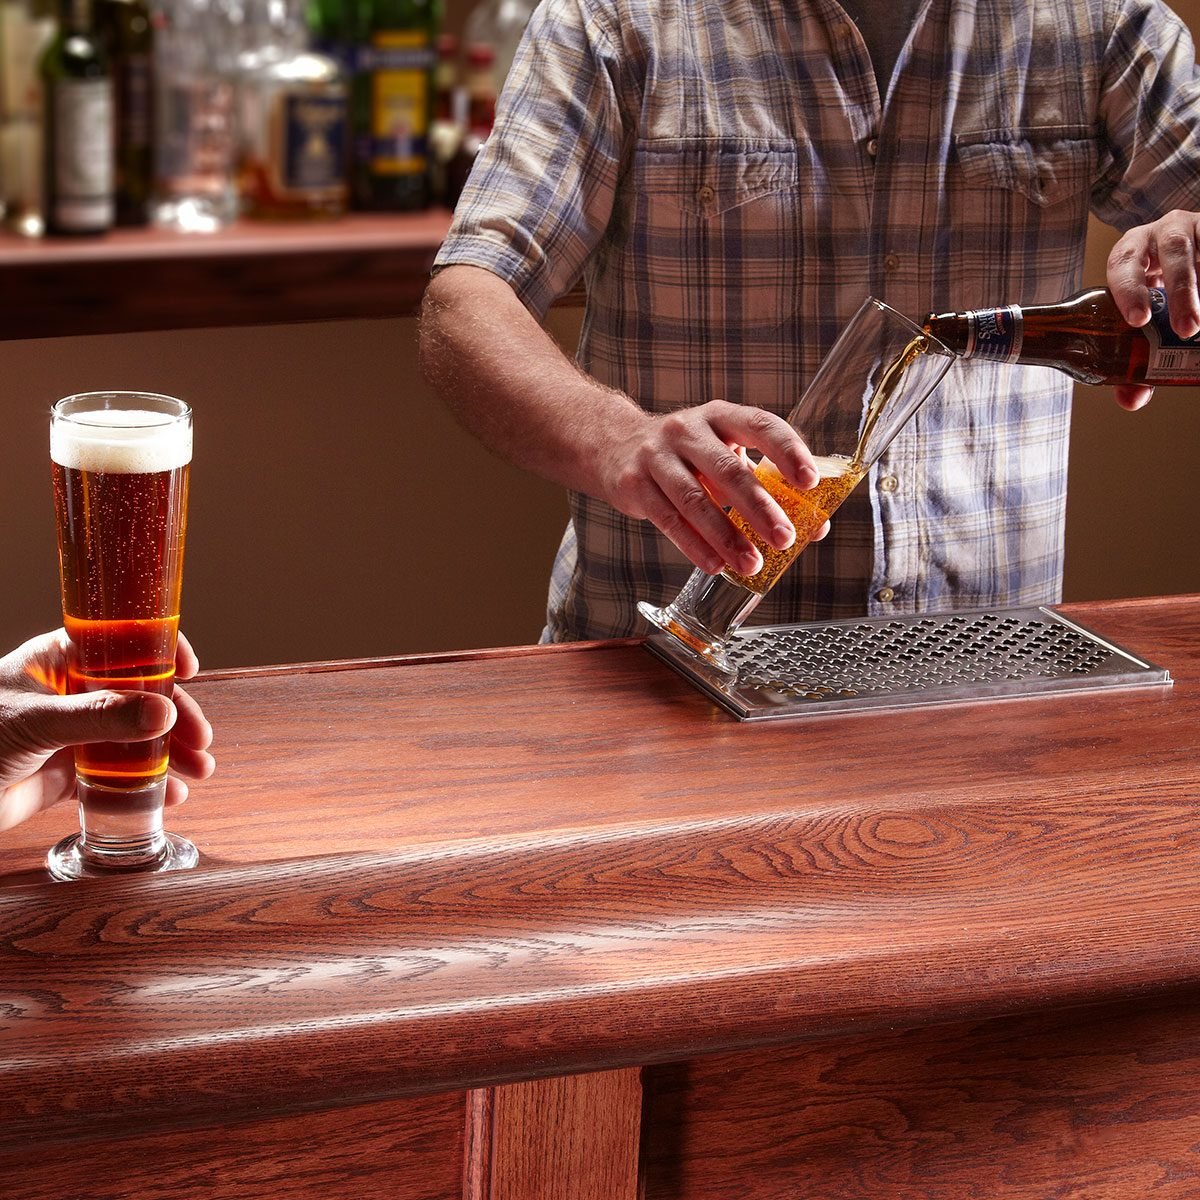 DIYers Share 9 Tips for Building the Ultimate Bar At Home